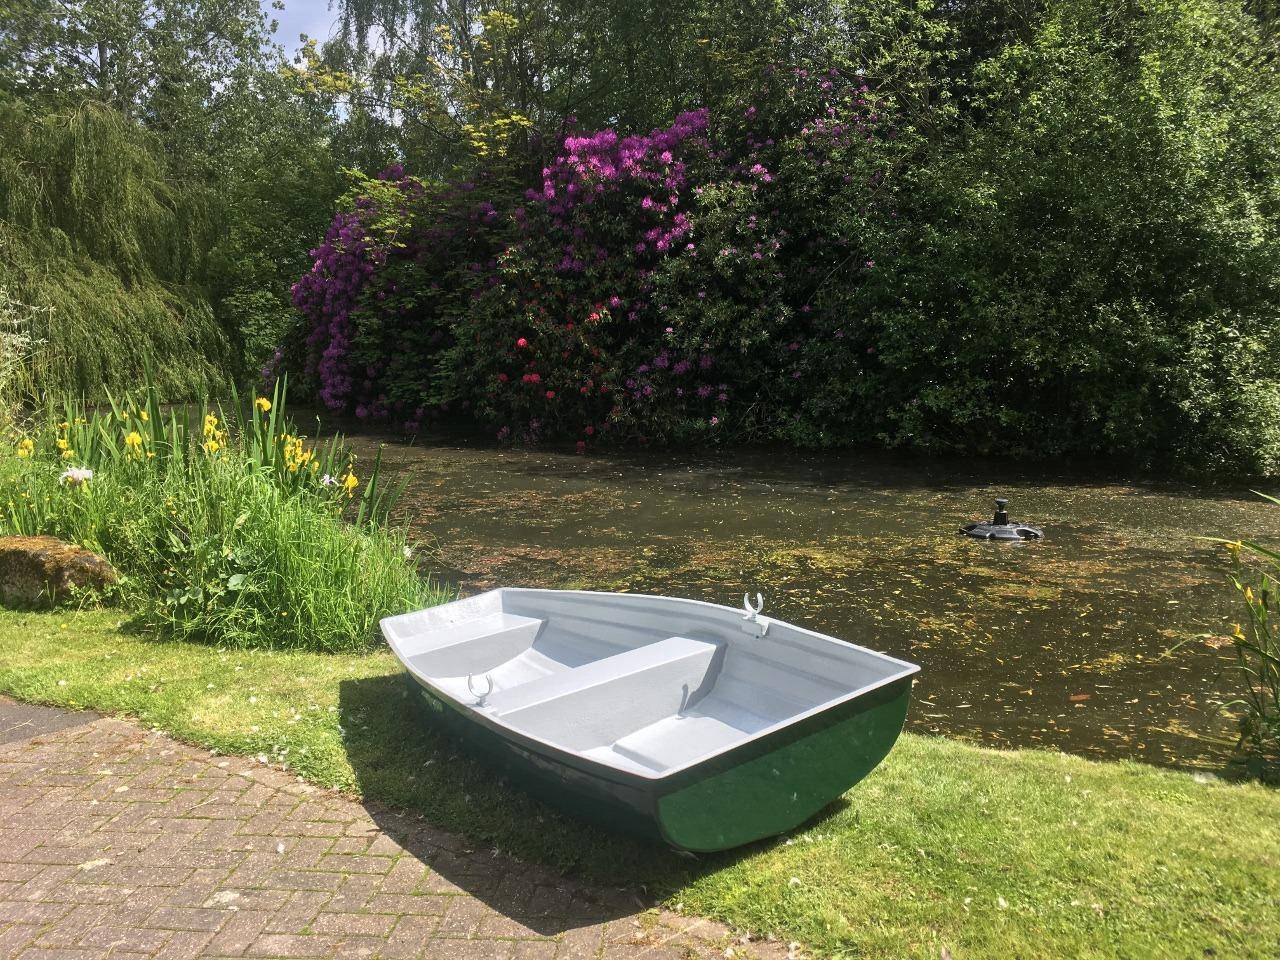 7.5ft dinghy on a hot summers day